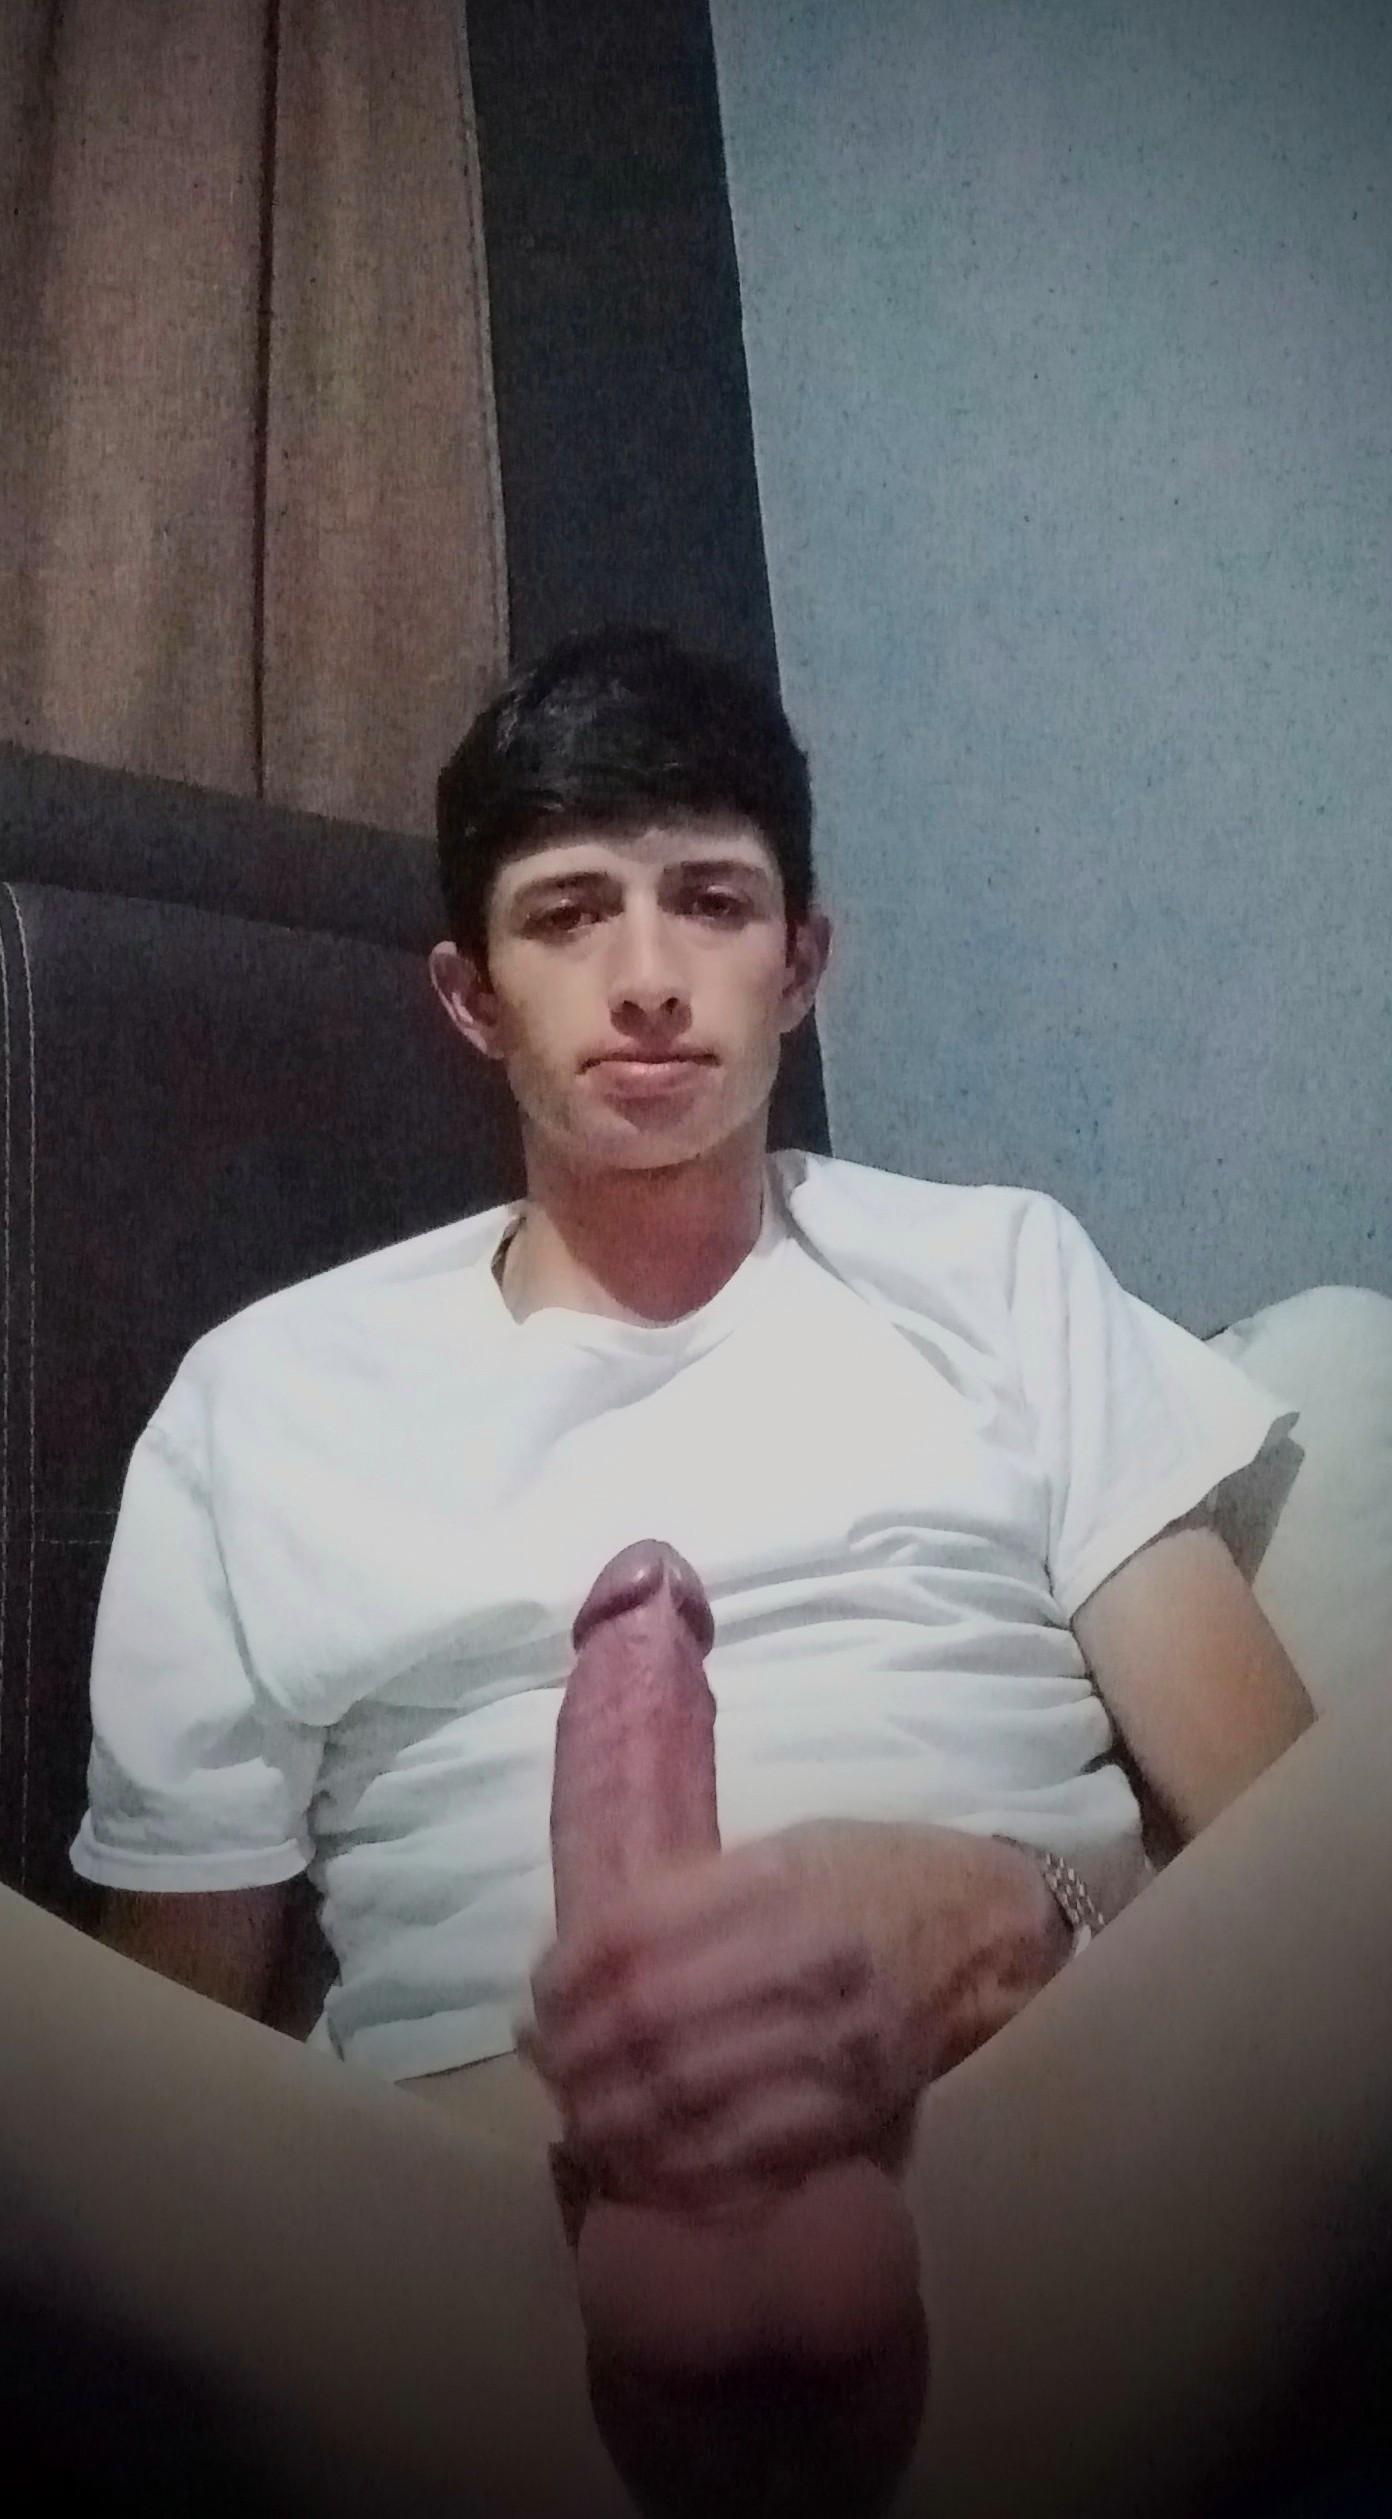 luisjoven5 live cam on Cam4